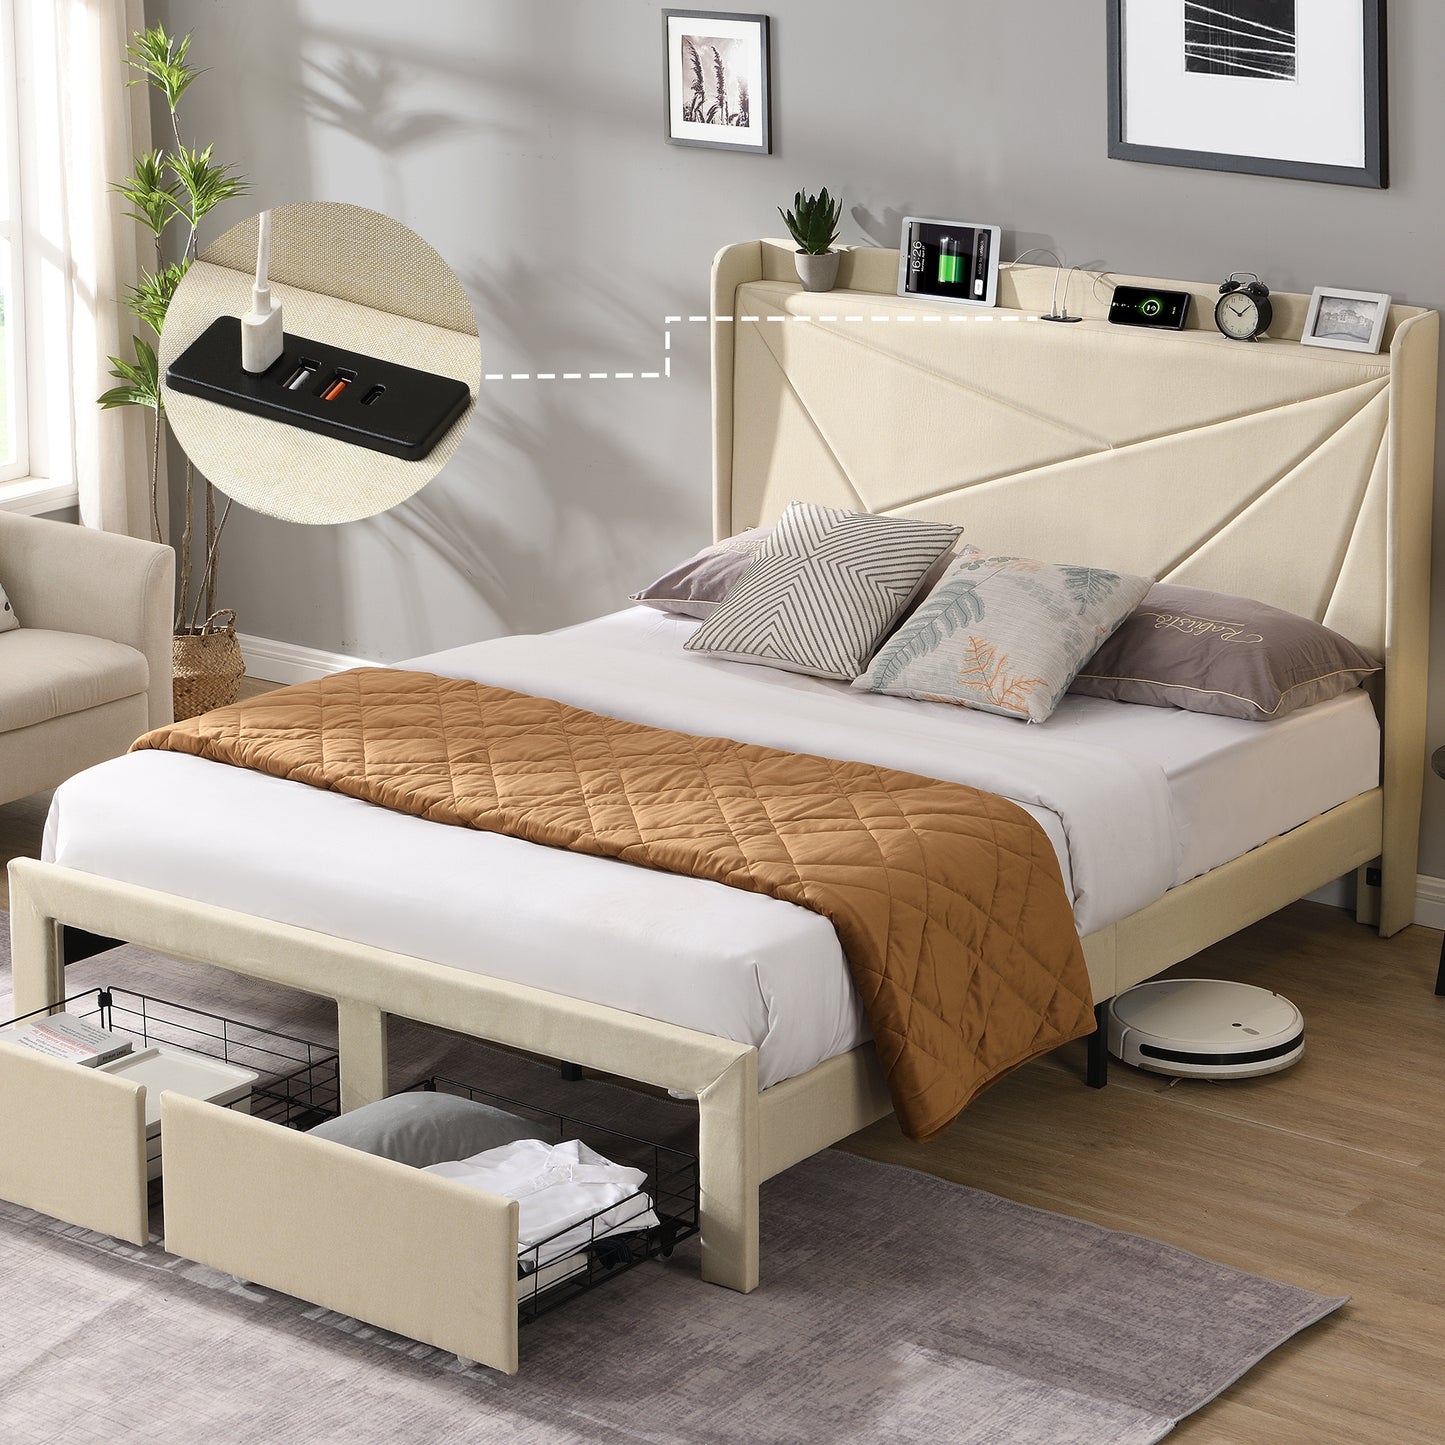 Queen Size Bed Frame with 2 Storage Drawers, Upholstered Bed Frame with Wingback Headboard Storage Shelf Built-in  USB Charging Stations and Strong Wood Slats Support, No Box Spring Needed, Beige